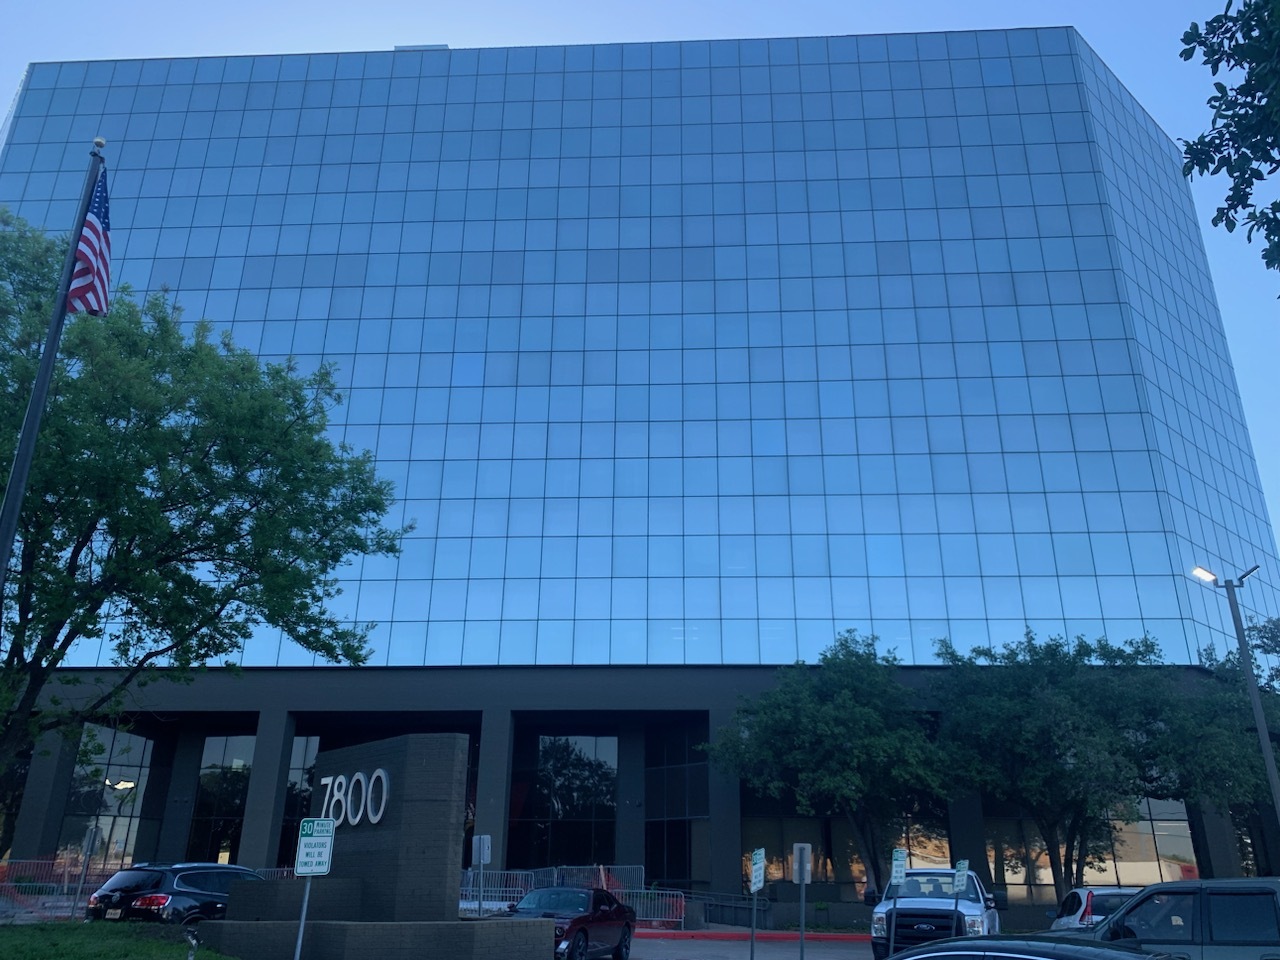 The city of Dallas' development services office building at 7800 N. Stemmons Freeway has...